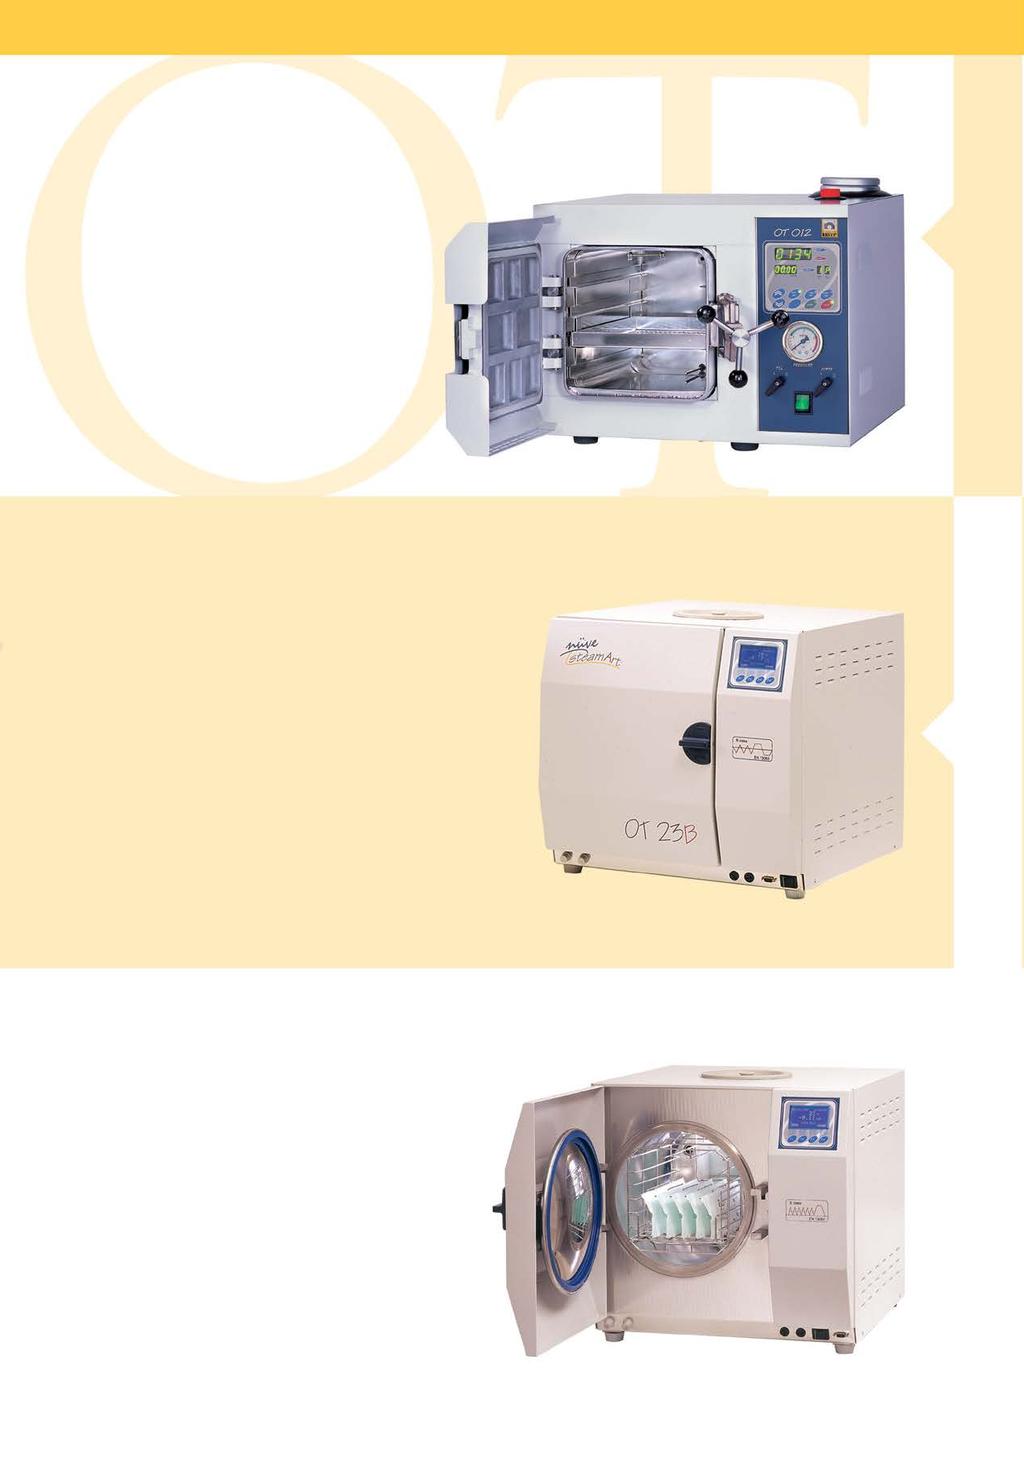 OT 012 BENCH TOP STEAM STERILIZER Chamber volume: 12 liters. Temperature range: 110 C / 140 C. Used for the sterilization of unwrapped medical or dental instruments.